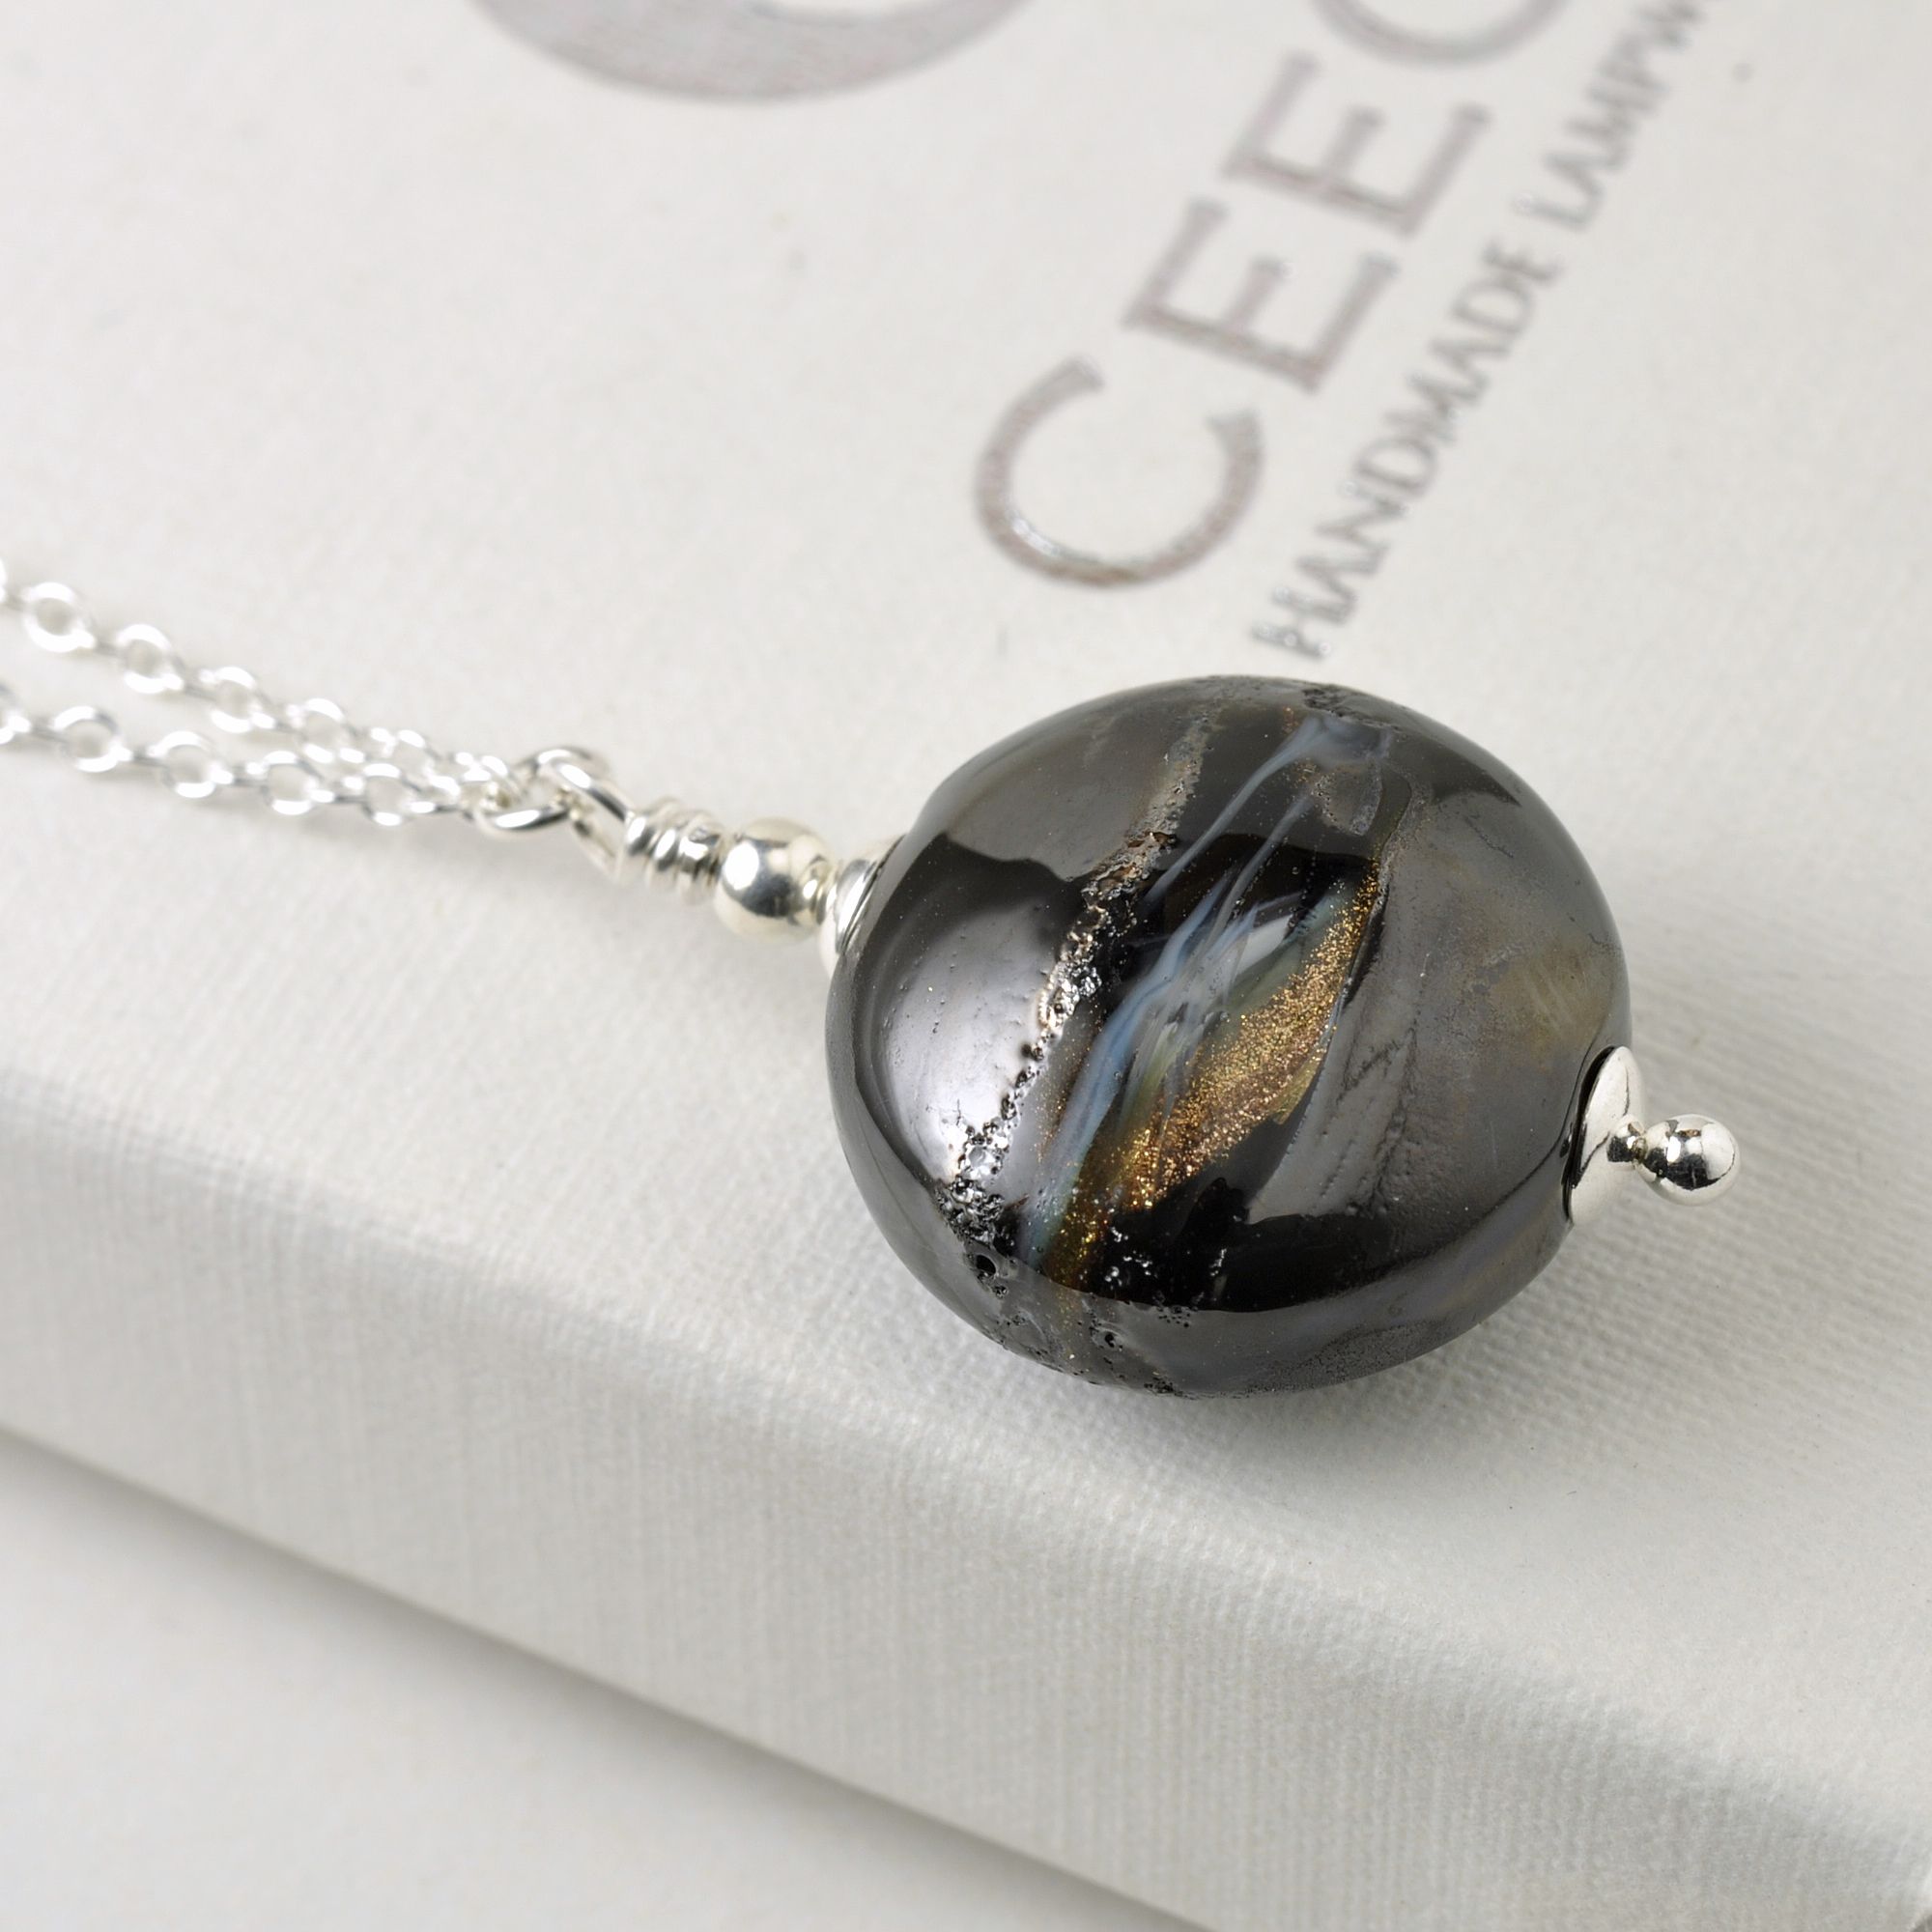 Handmade Gold and Black Lampwork Glass Necklace